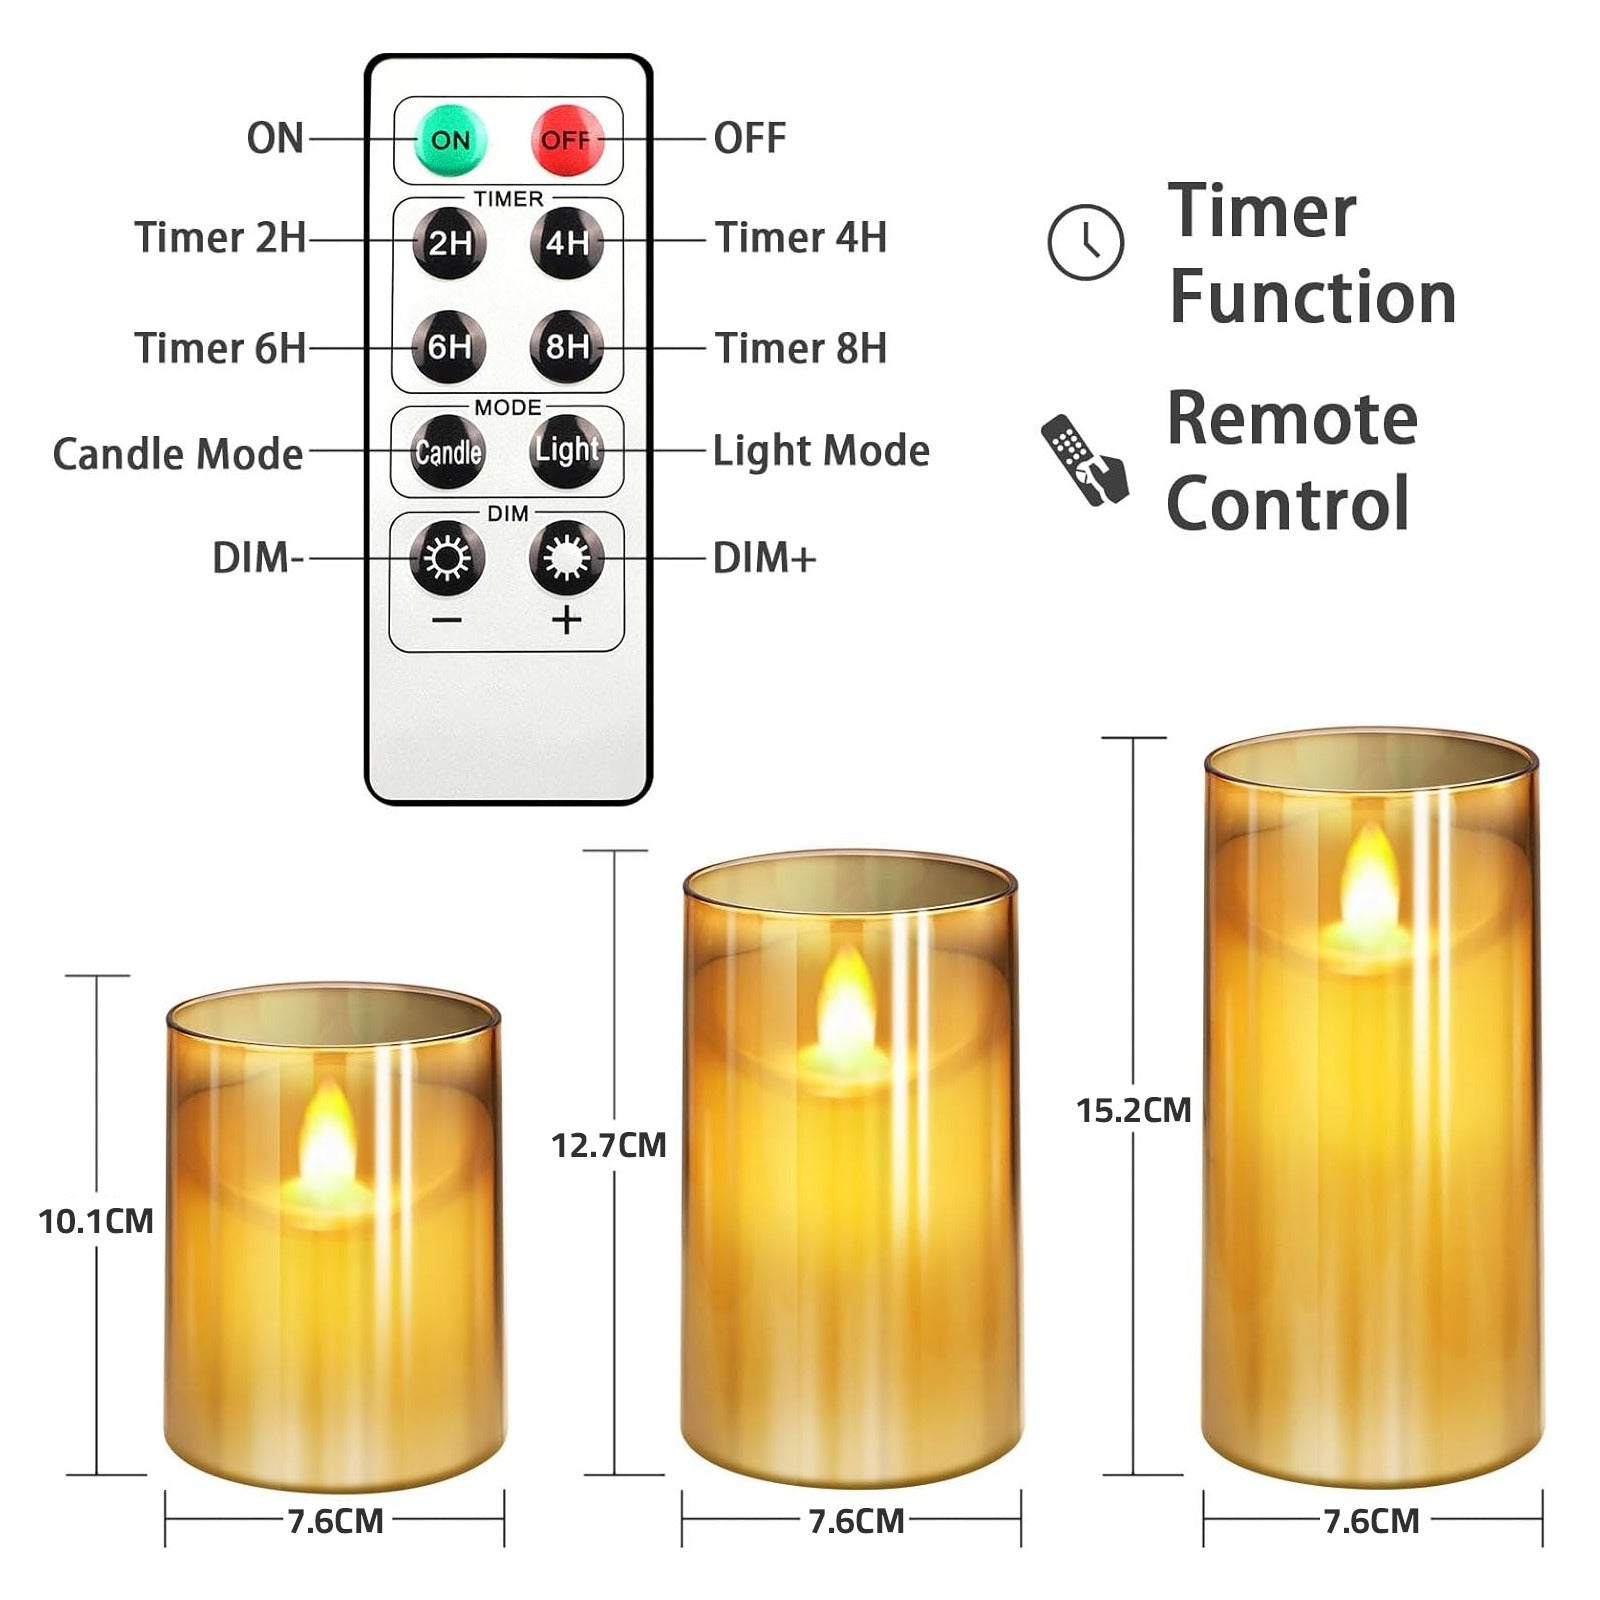 size and function of 3pcs Flameless Candle with Remote